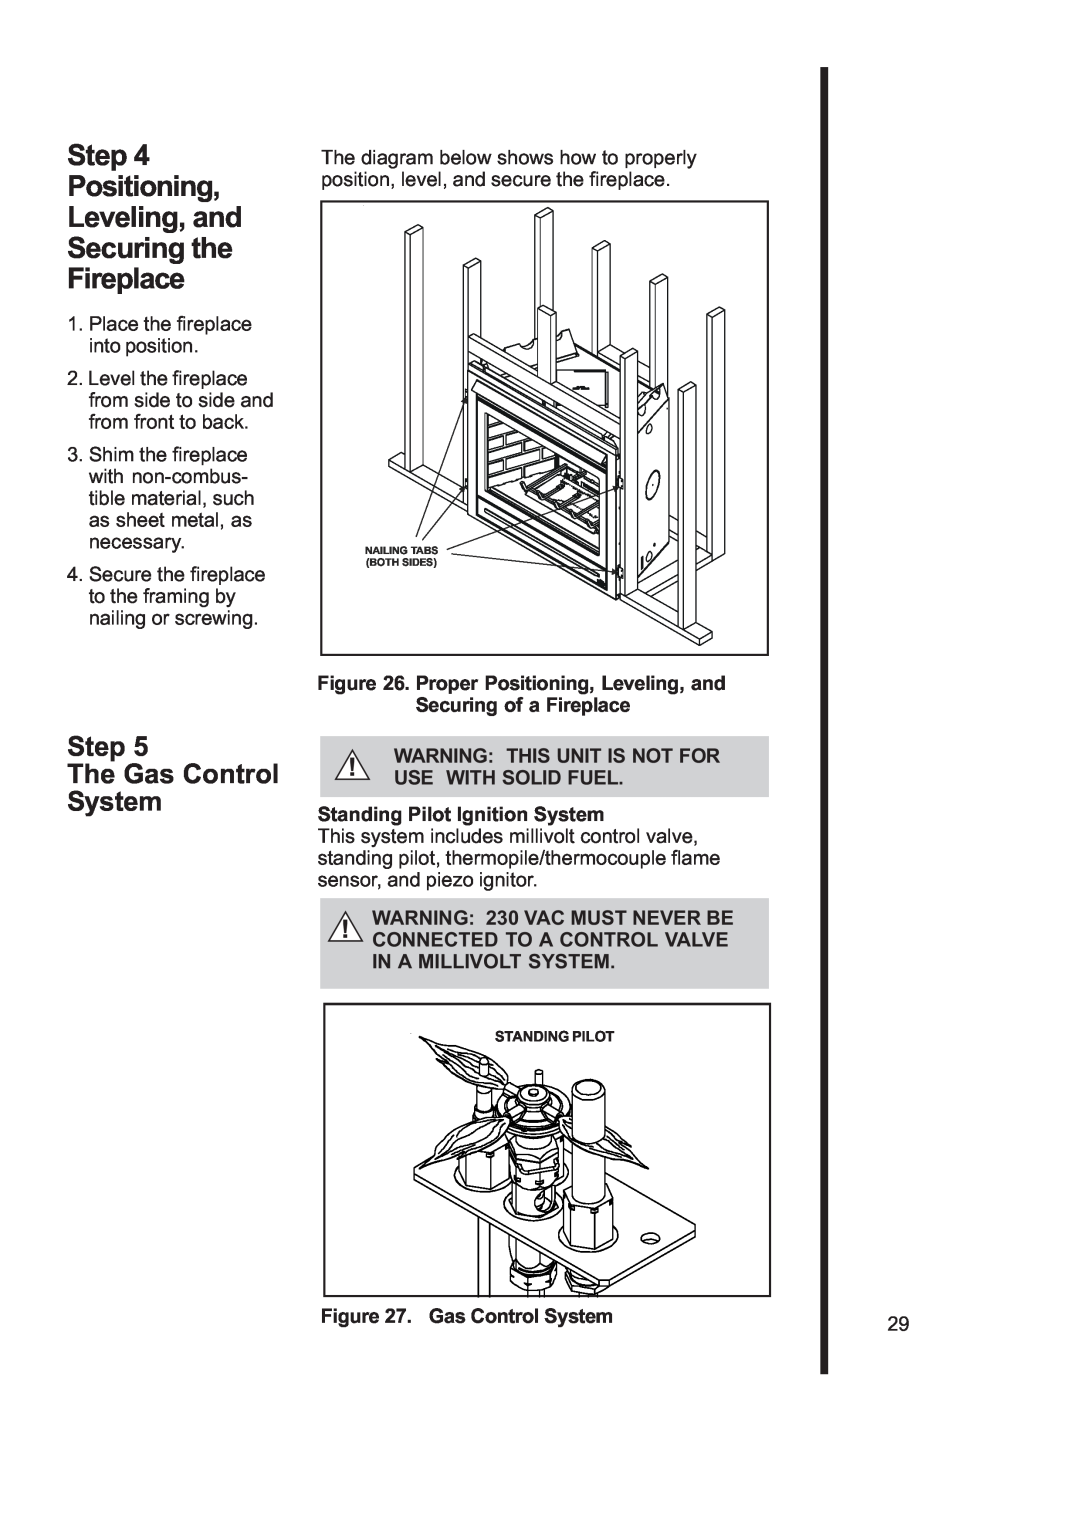 Heat & Glo LifeStyle 6000TRS-CD manual Step Positioning Leveling, and Securing the Fireplace, Step The Gas Control System 